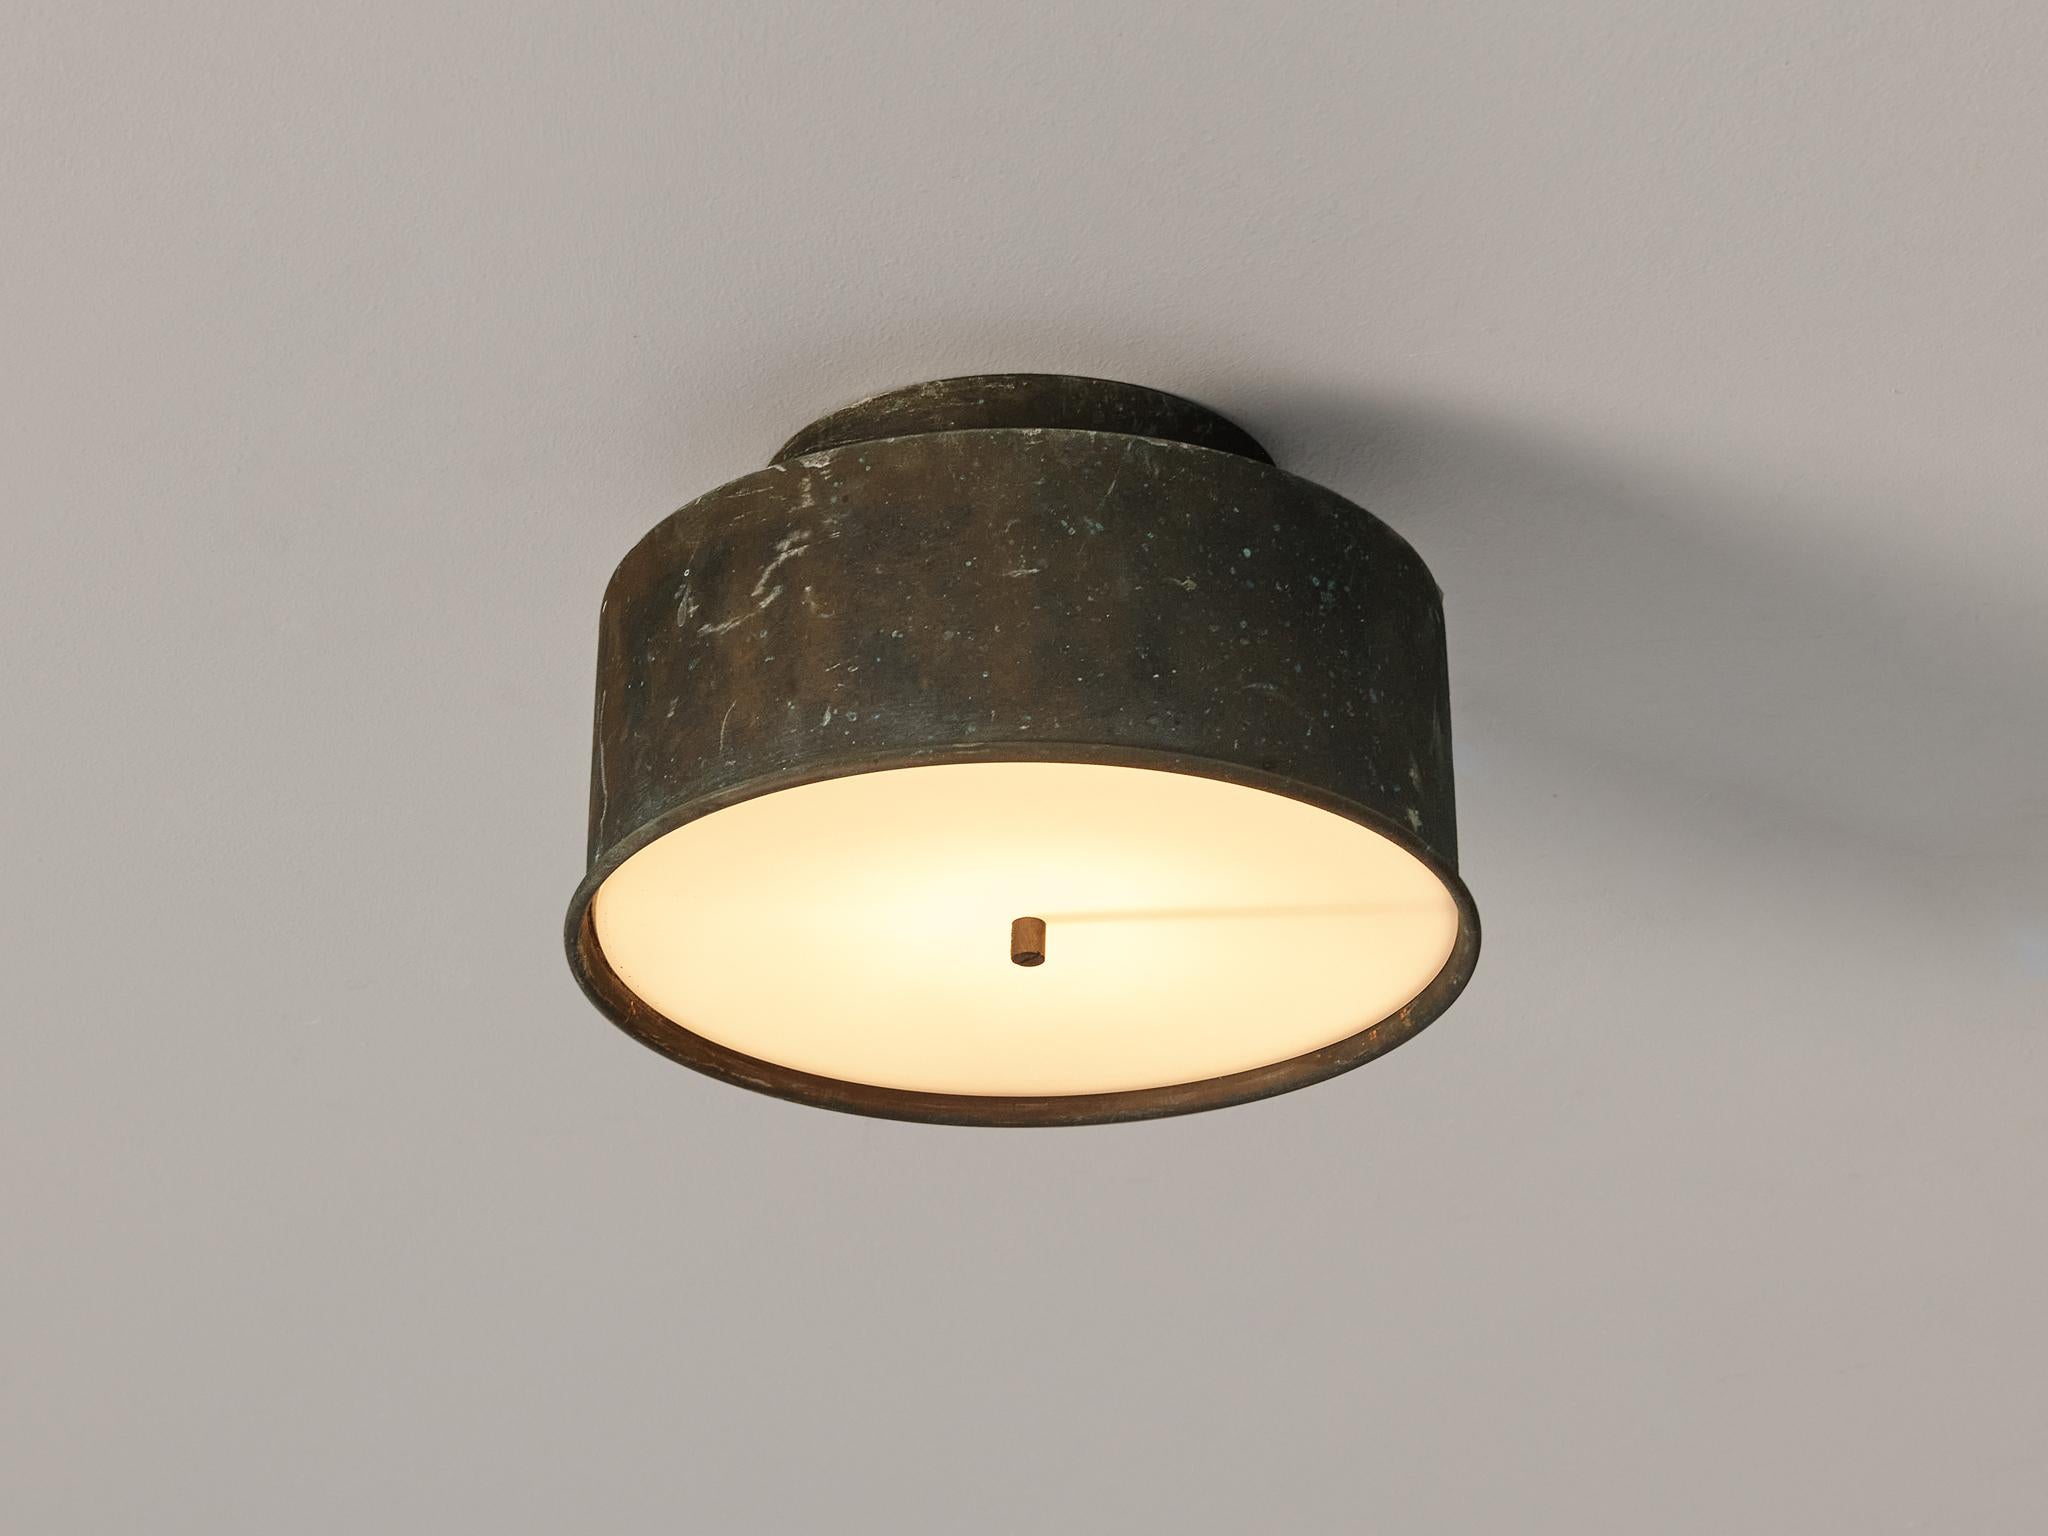 Hans-Agne Jakobsson, ceiling lamp, model T 125, patinated copper, acrylic, Sweden, 1950s

This ceiling lamp by Swedish designer Hans-Agne Jakobsson feature a cylindric lampshade that contains an opalized acrylic diffuser. The way the rich patina